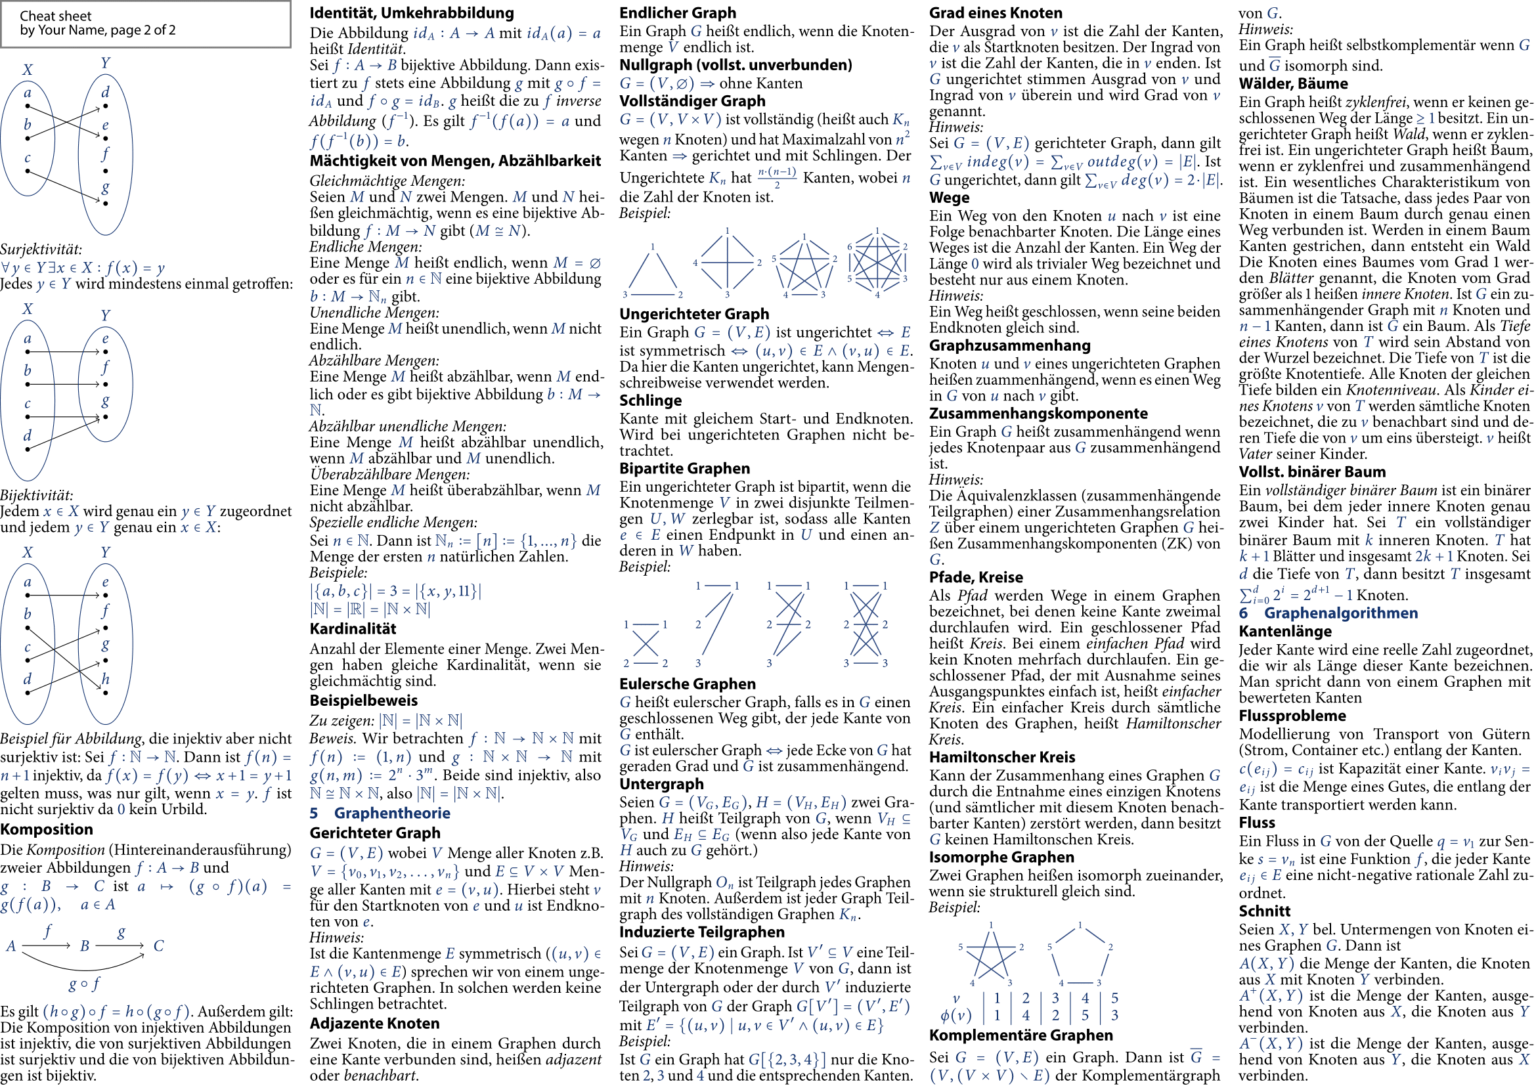 How To Make Cheat Sheets In Latex? Stack Overflow With Cheat Sheet